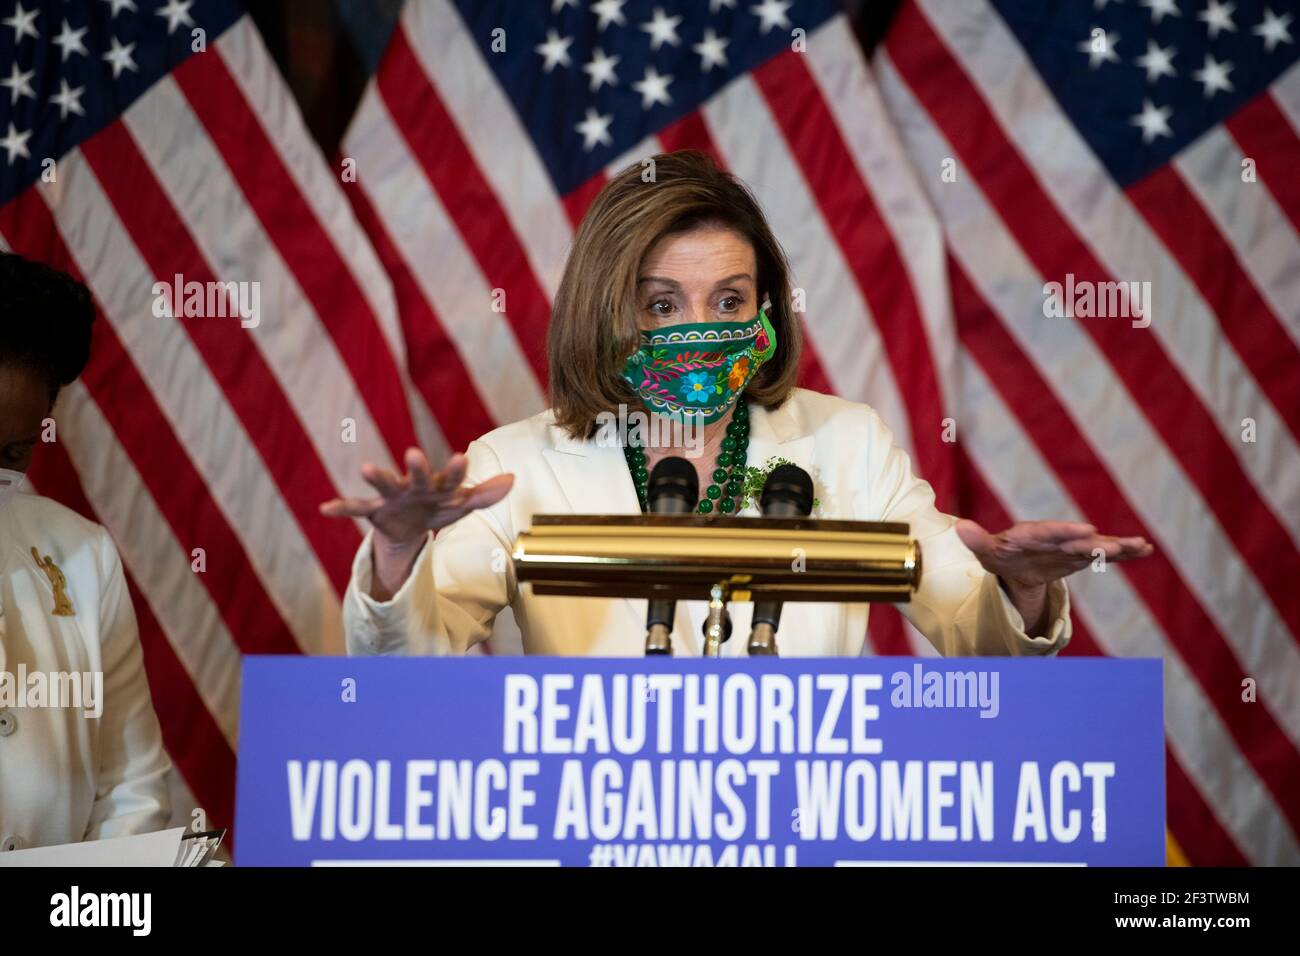 Speaker of the United States House of Representatives Nancy Pelosi (Democrat of California) offers remarks at a press conference regarding the Violence Against Women Act, at the U.S. Capitol in Washington, DC, Wednesday, March 17, 2021. Credit: Rod Lamkey/CNP /MediaPunch Stock Photo